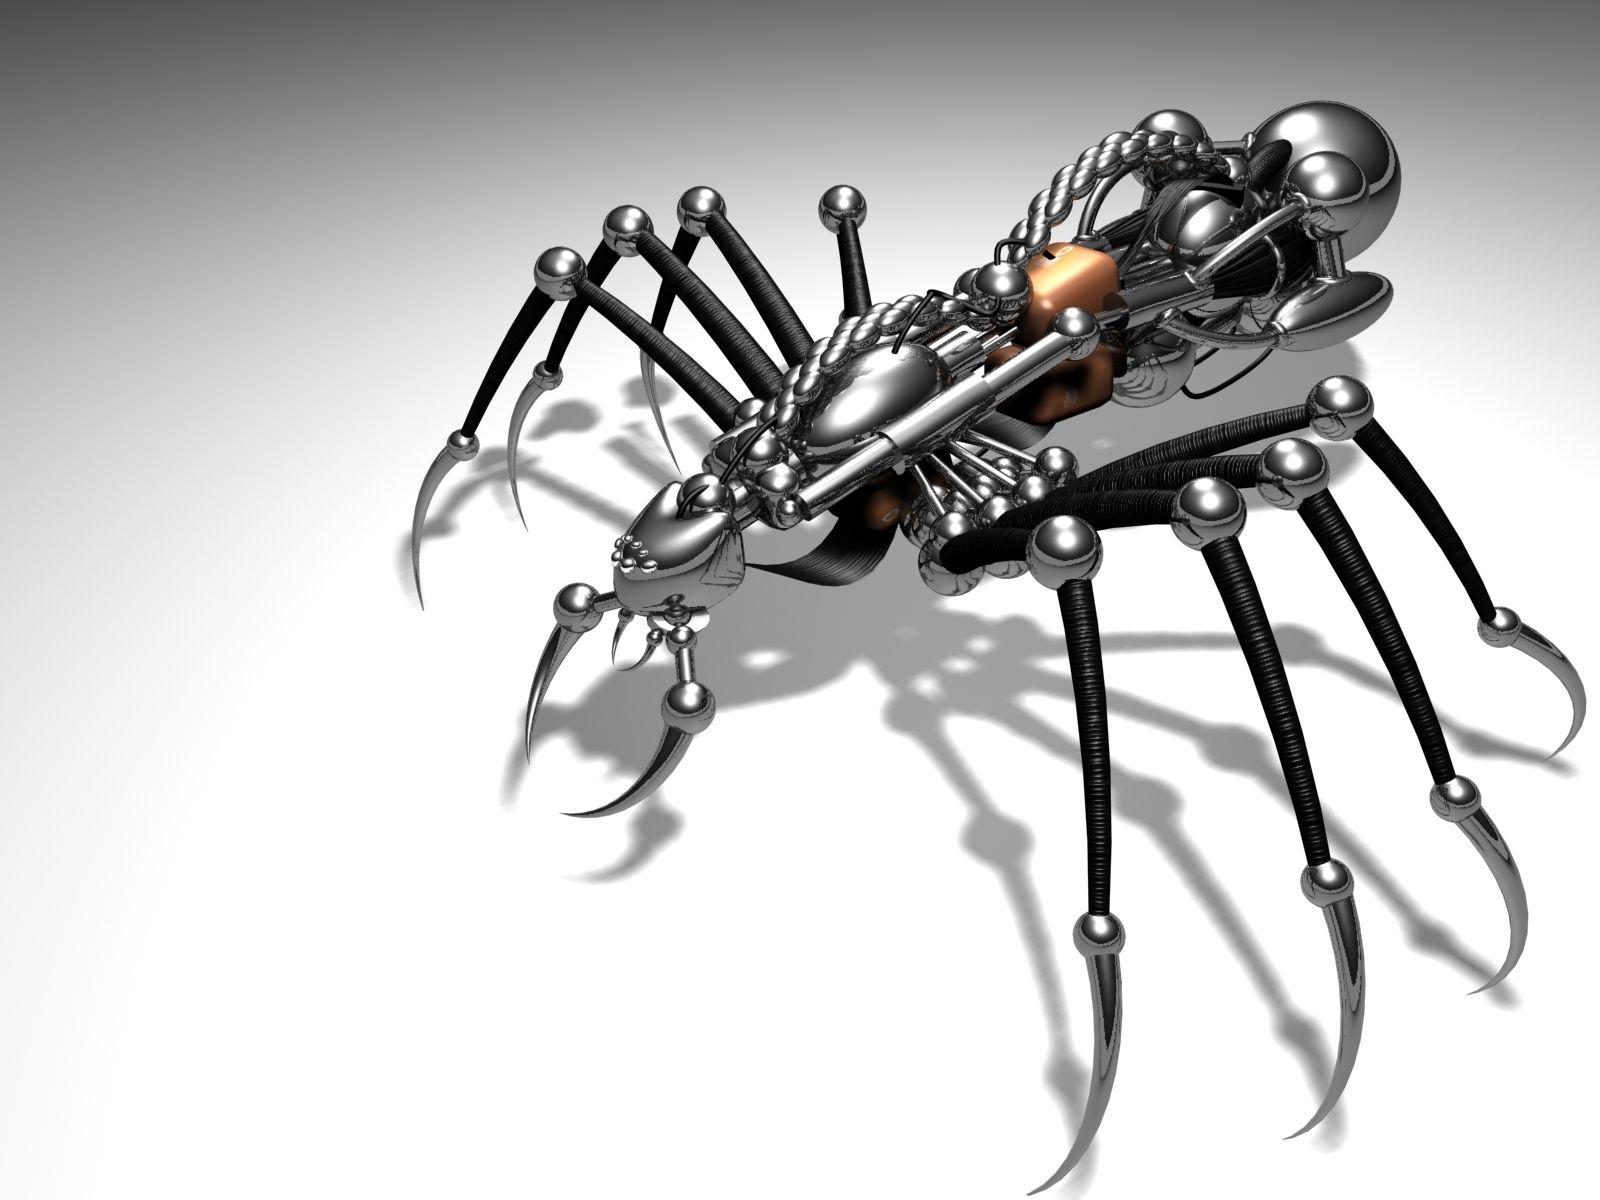 Animal You Are Viewing The Robots Named Desk Spider It Has Been